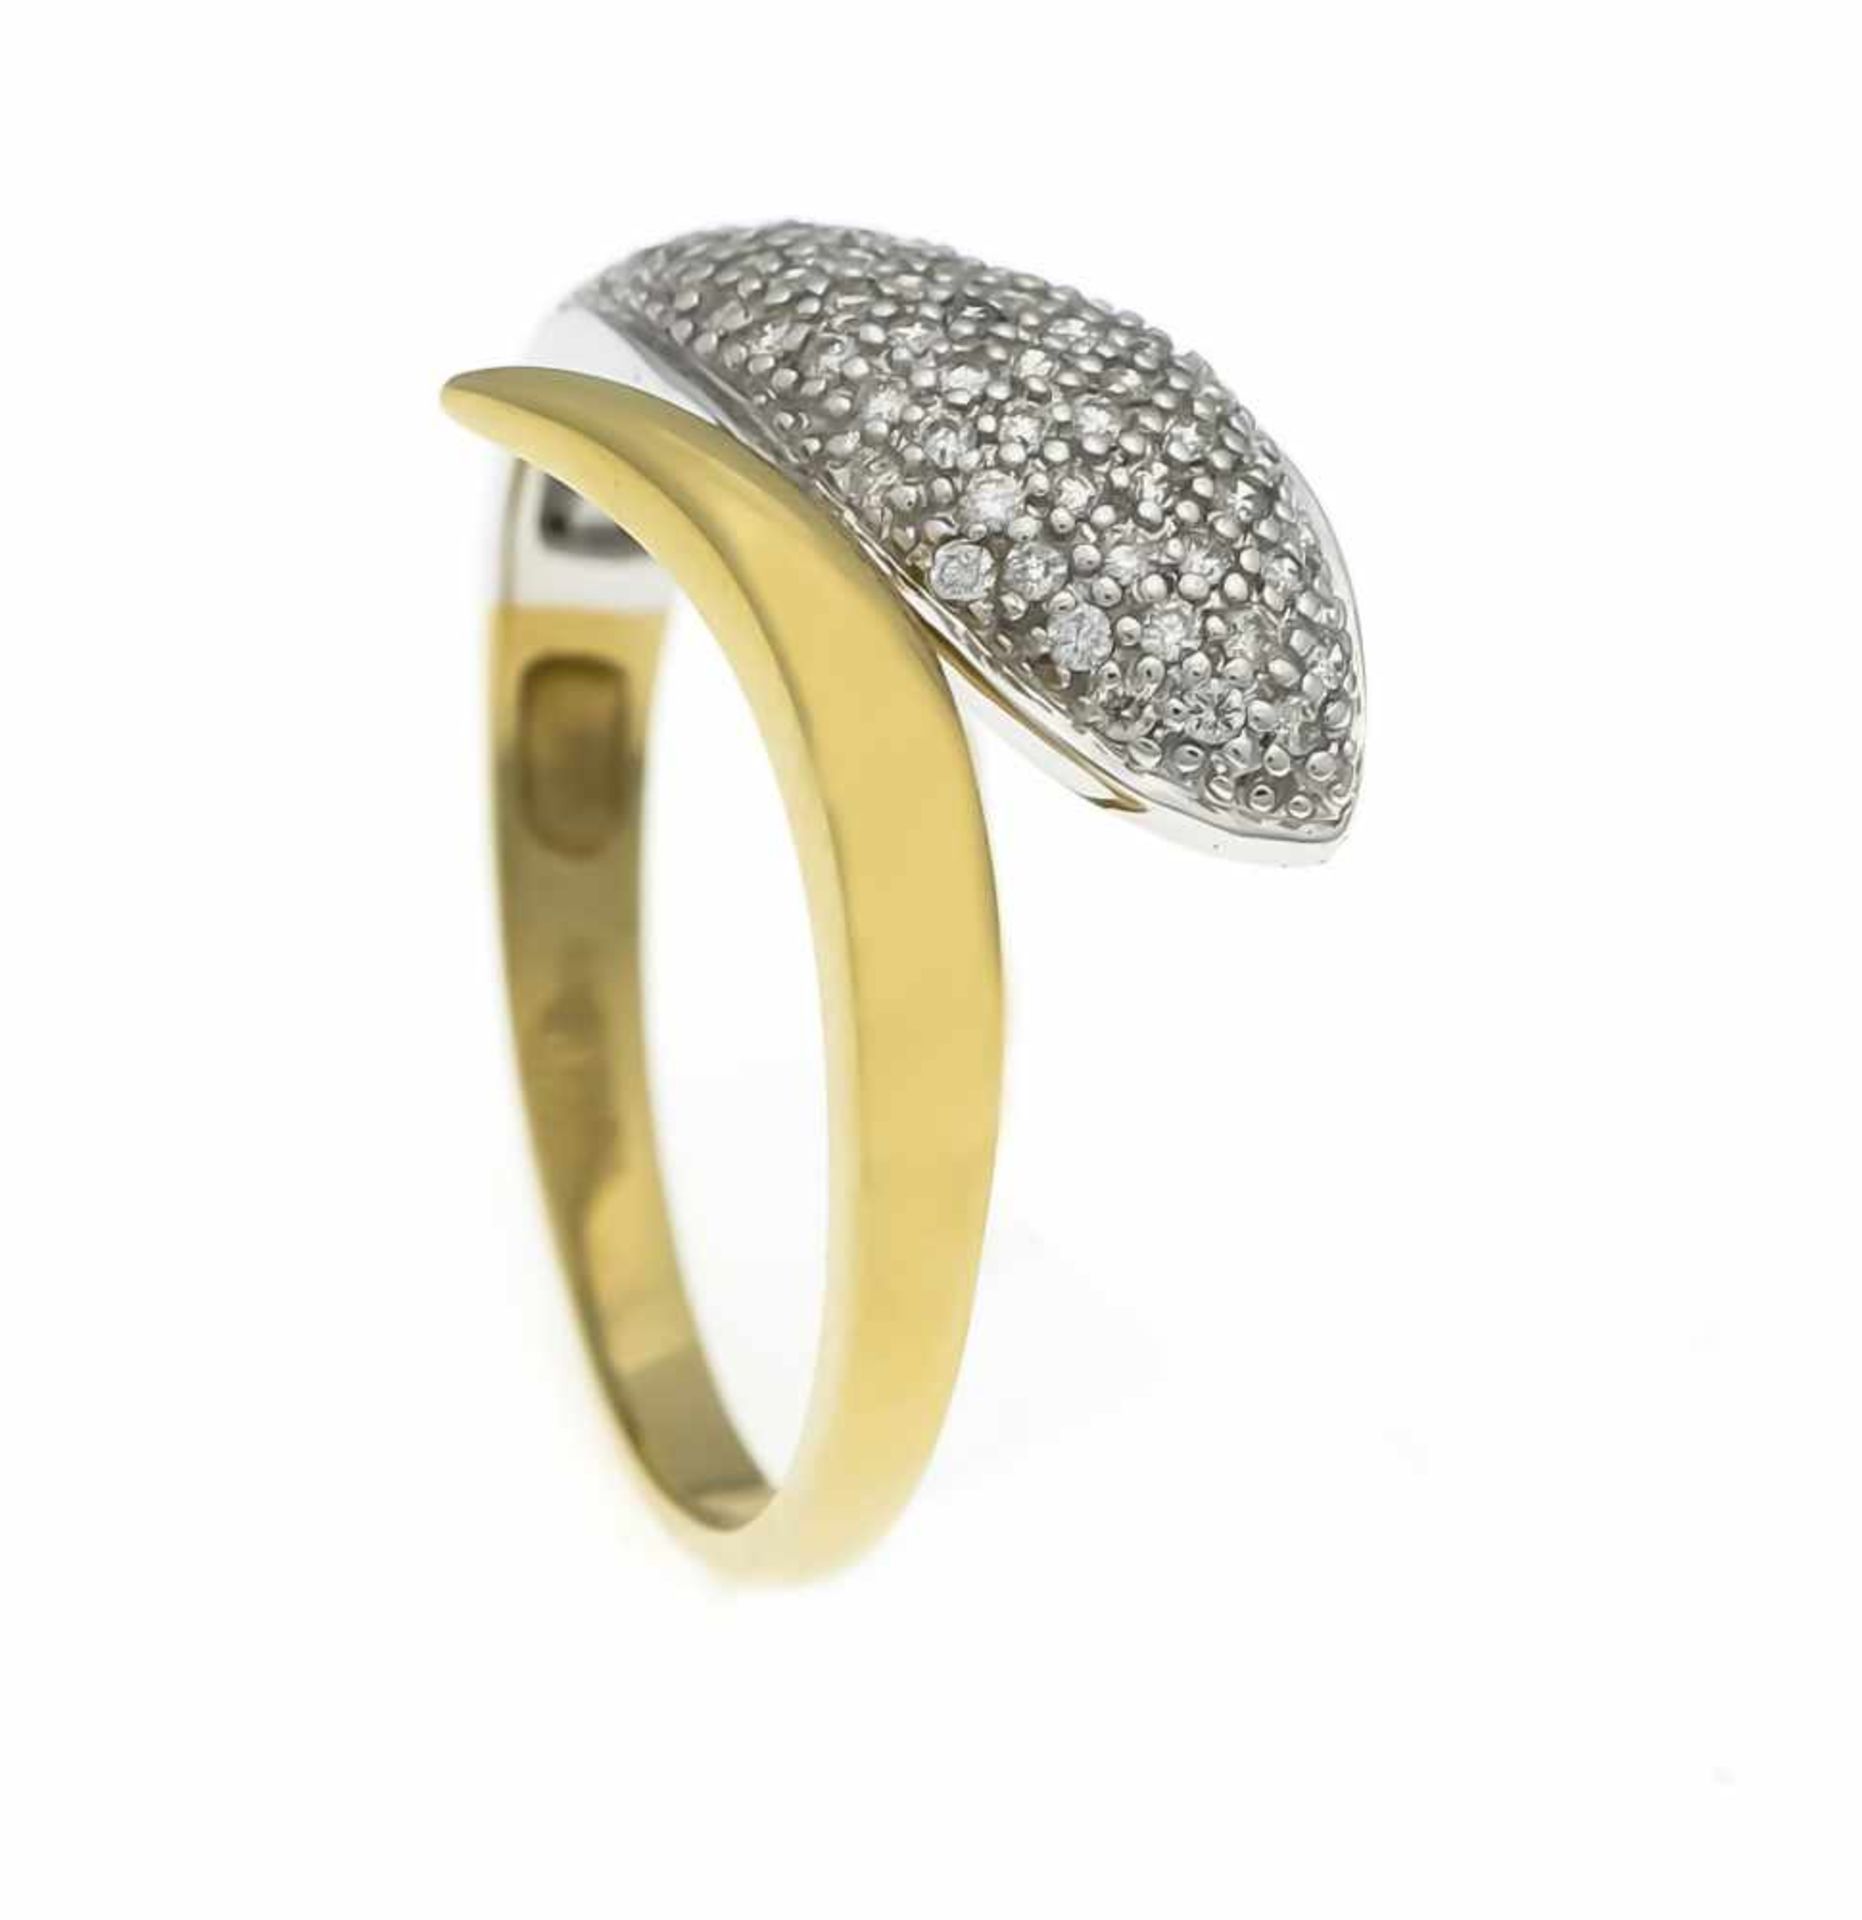 Brilliant Snake Ring WG / GG 585/000 with 75 brilliant-cut diamonds, total 0.50 ct